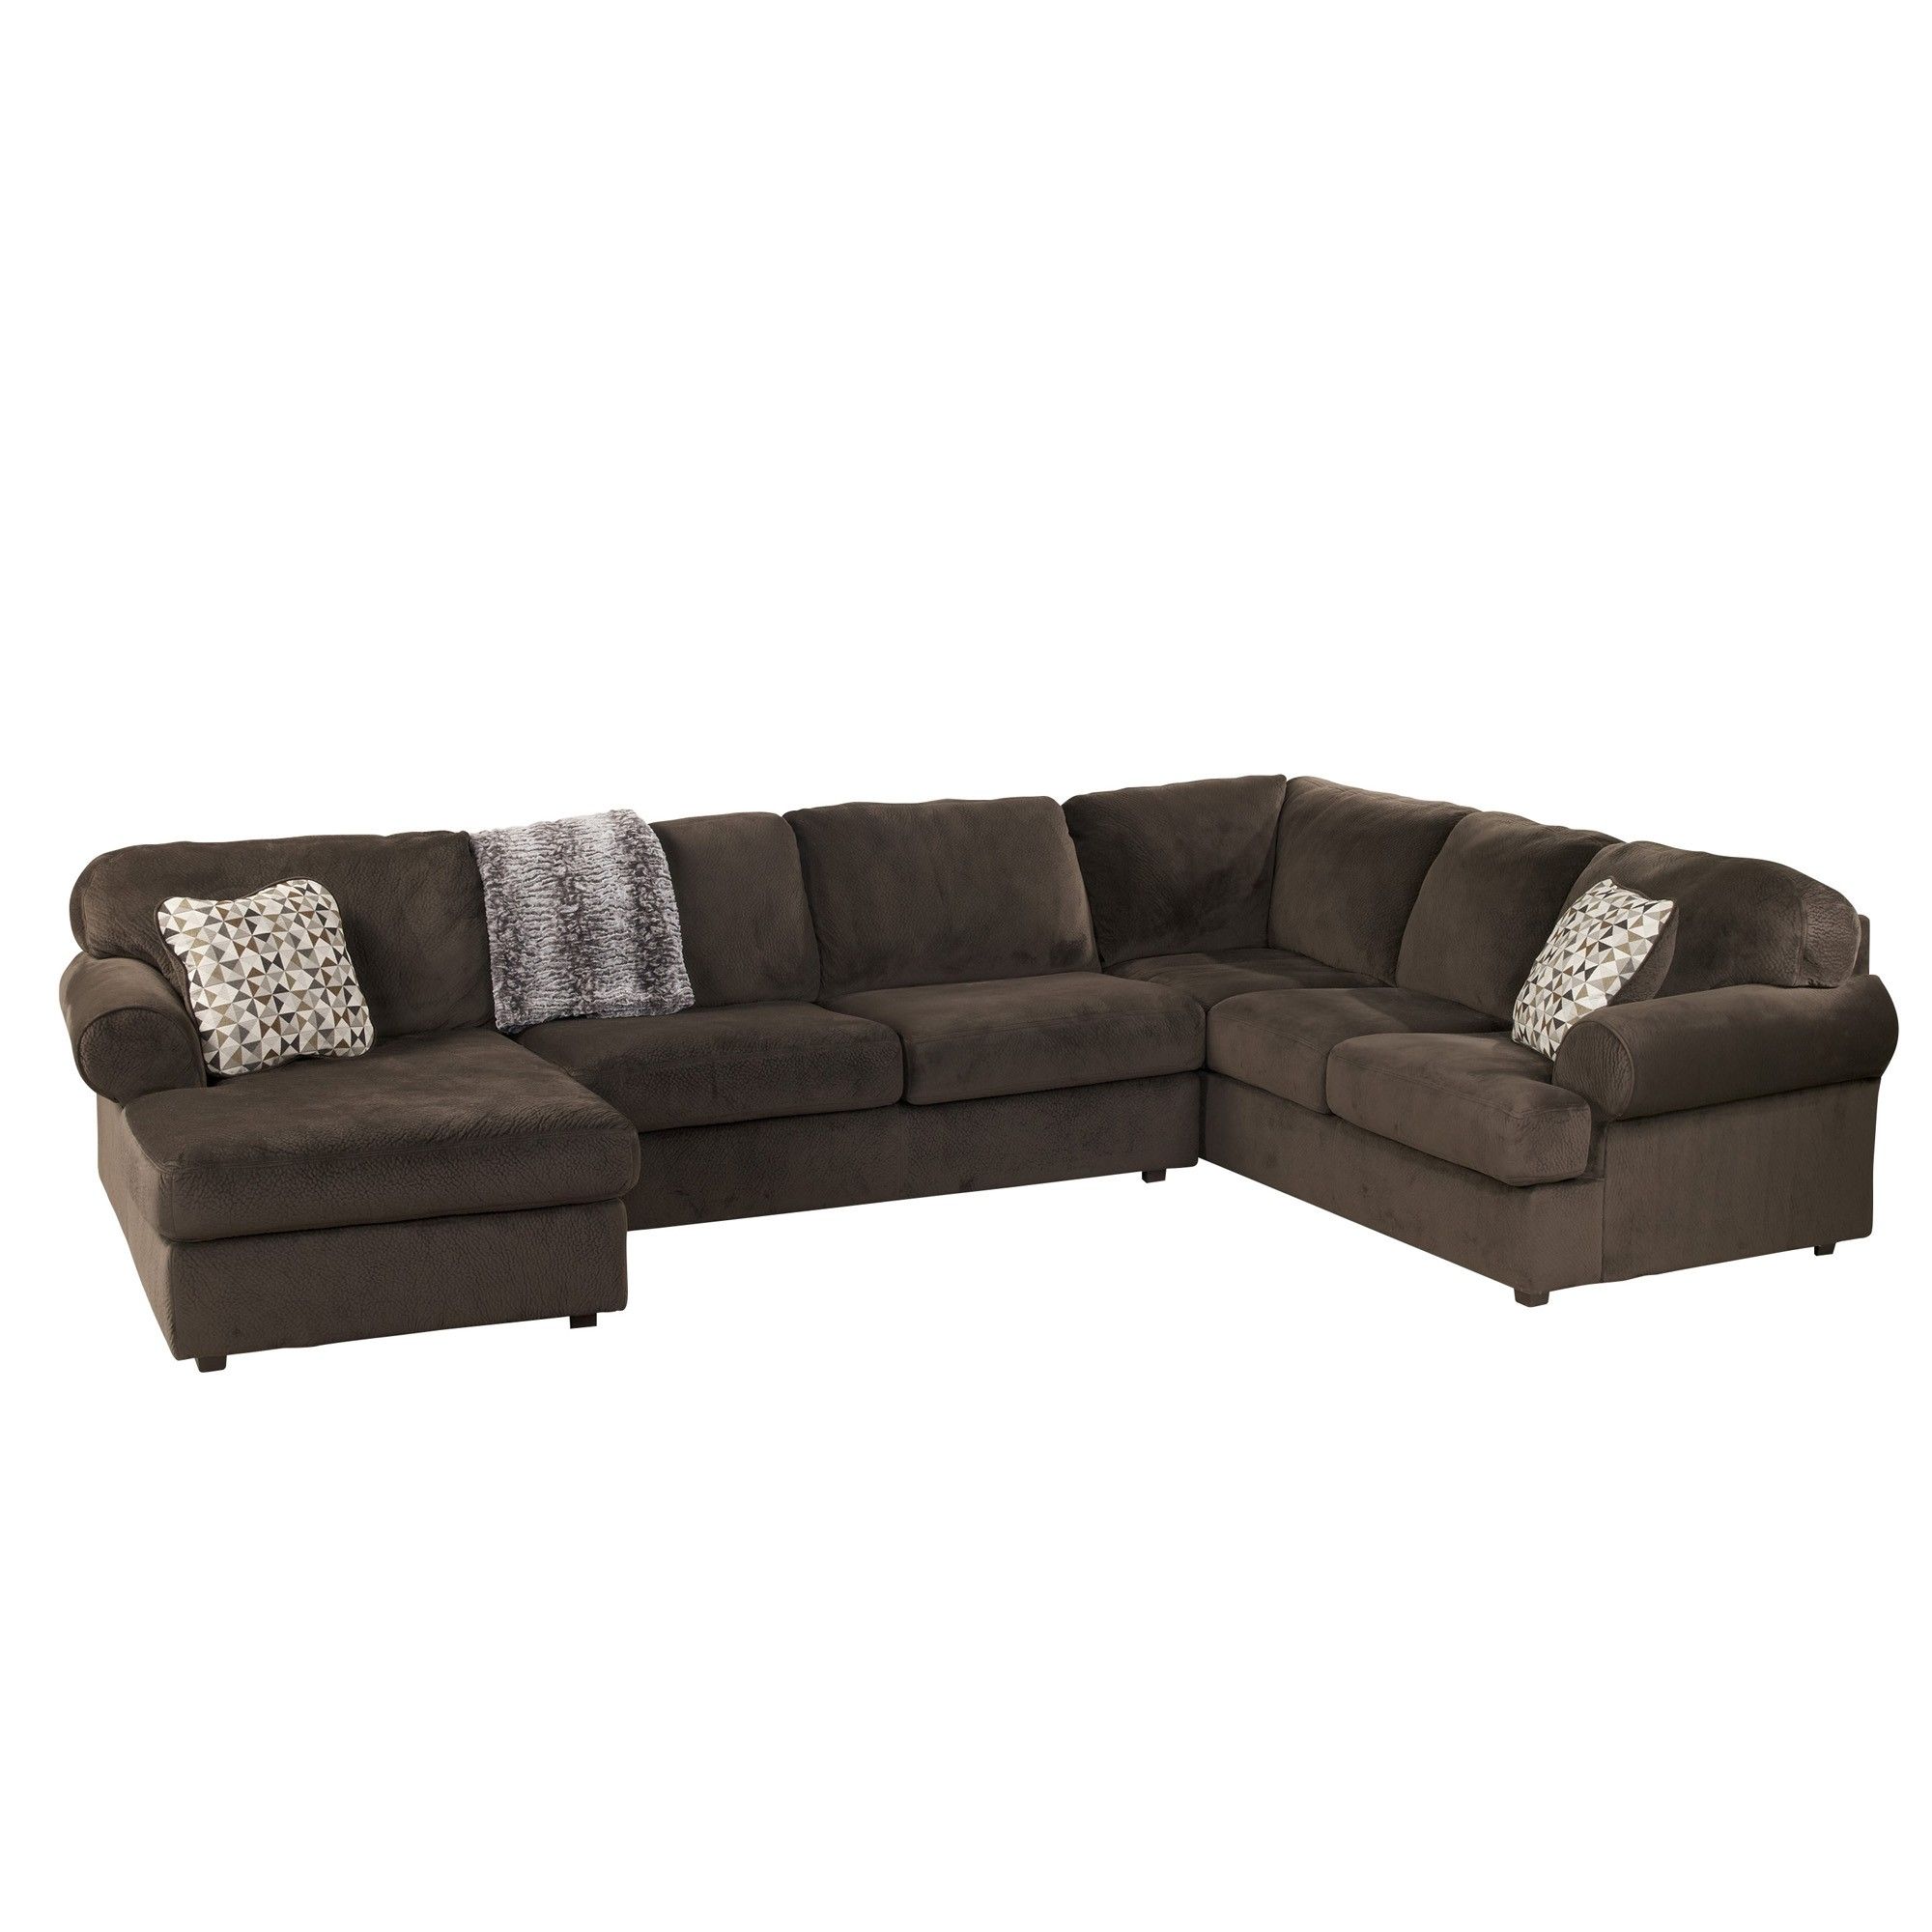 Sectionals | Tepperman's Intended For Teppermans Sectional Sofas (View 2 of 10)